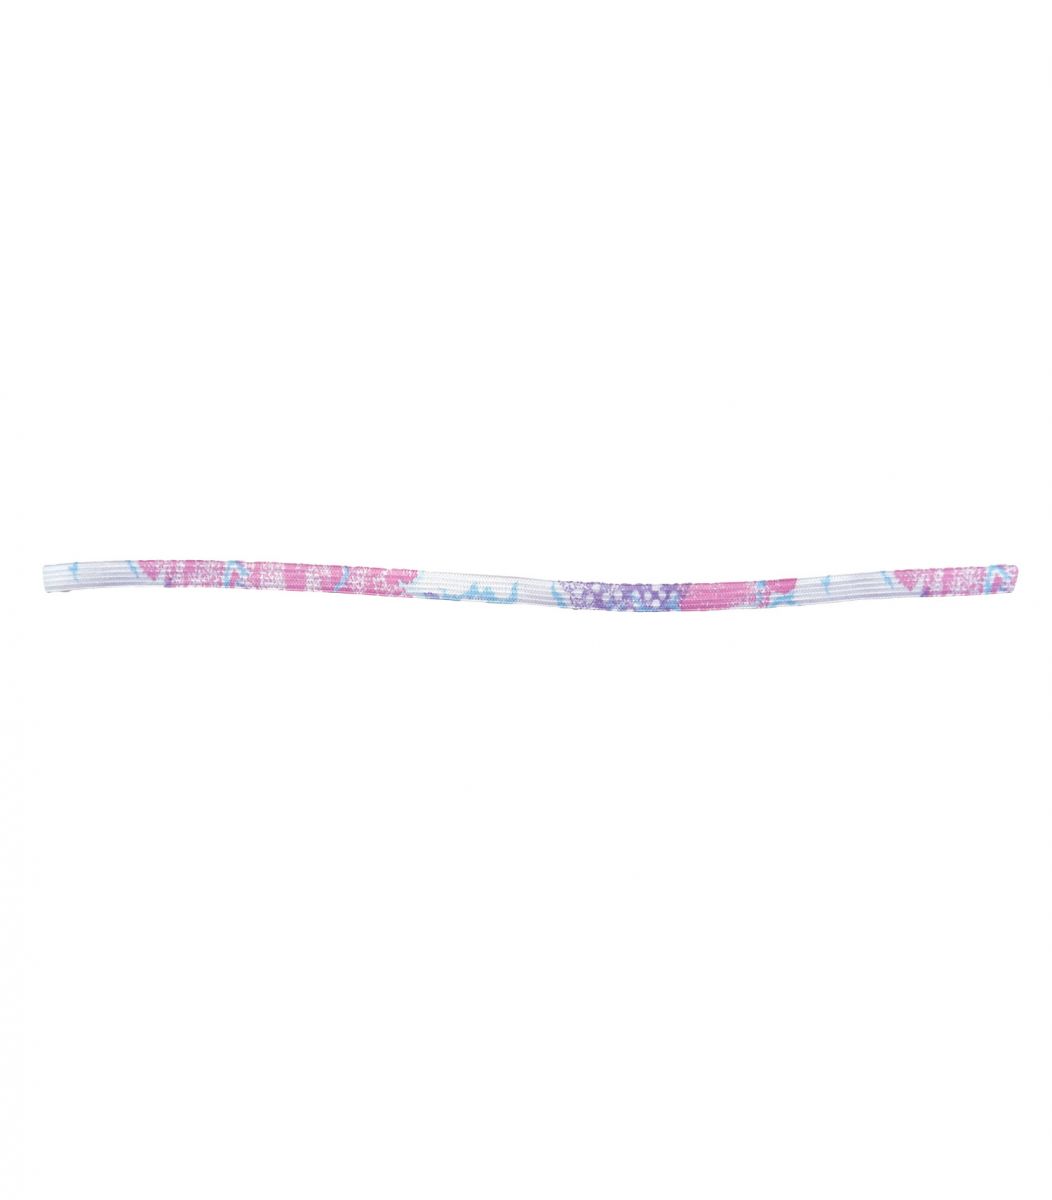  Rubber Band  Rubber Band Colorful 7mm Rub07-b-3